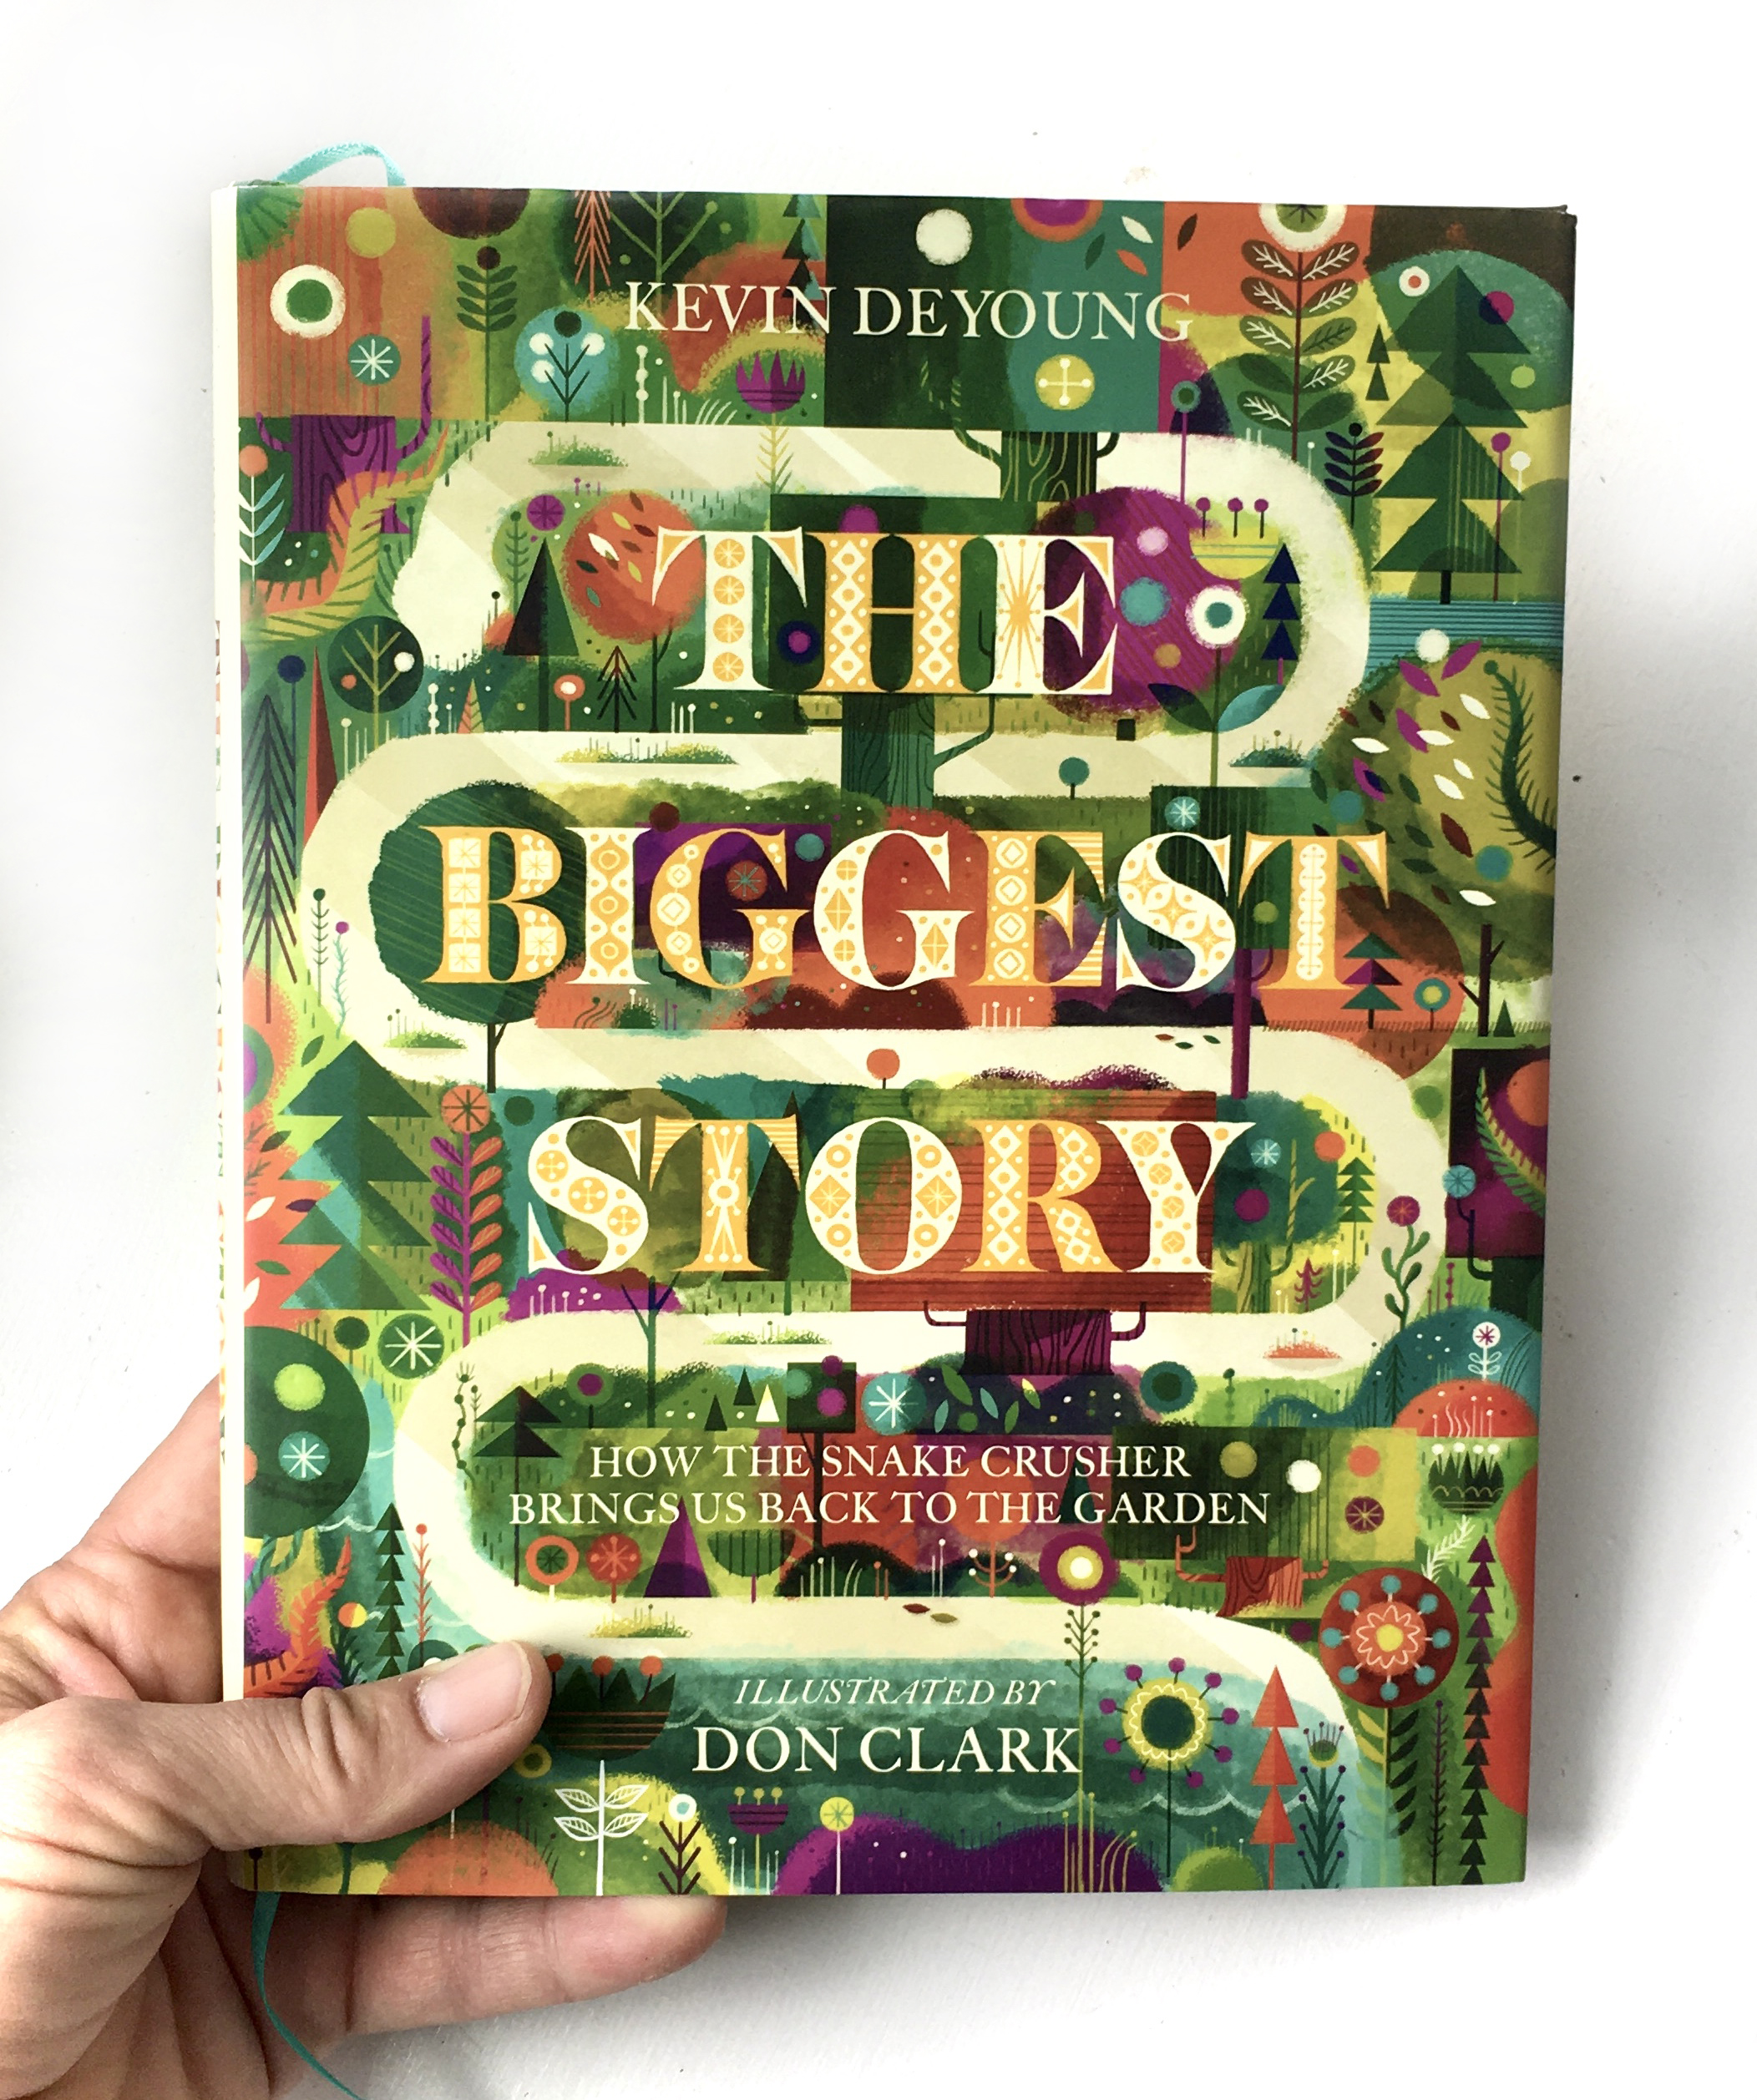 The Biggest Story, family devotions, children's Bible story